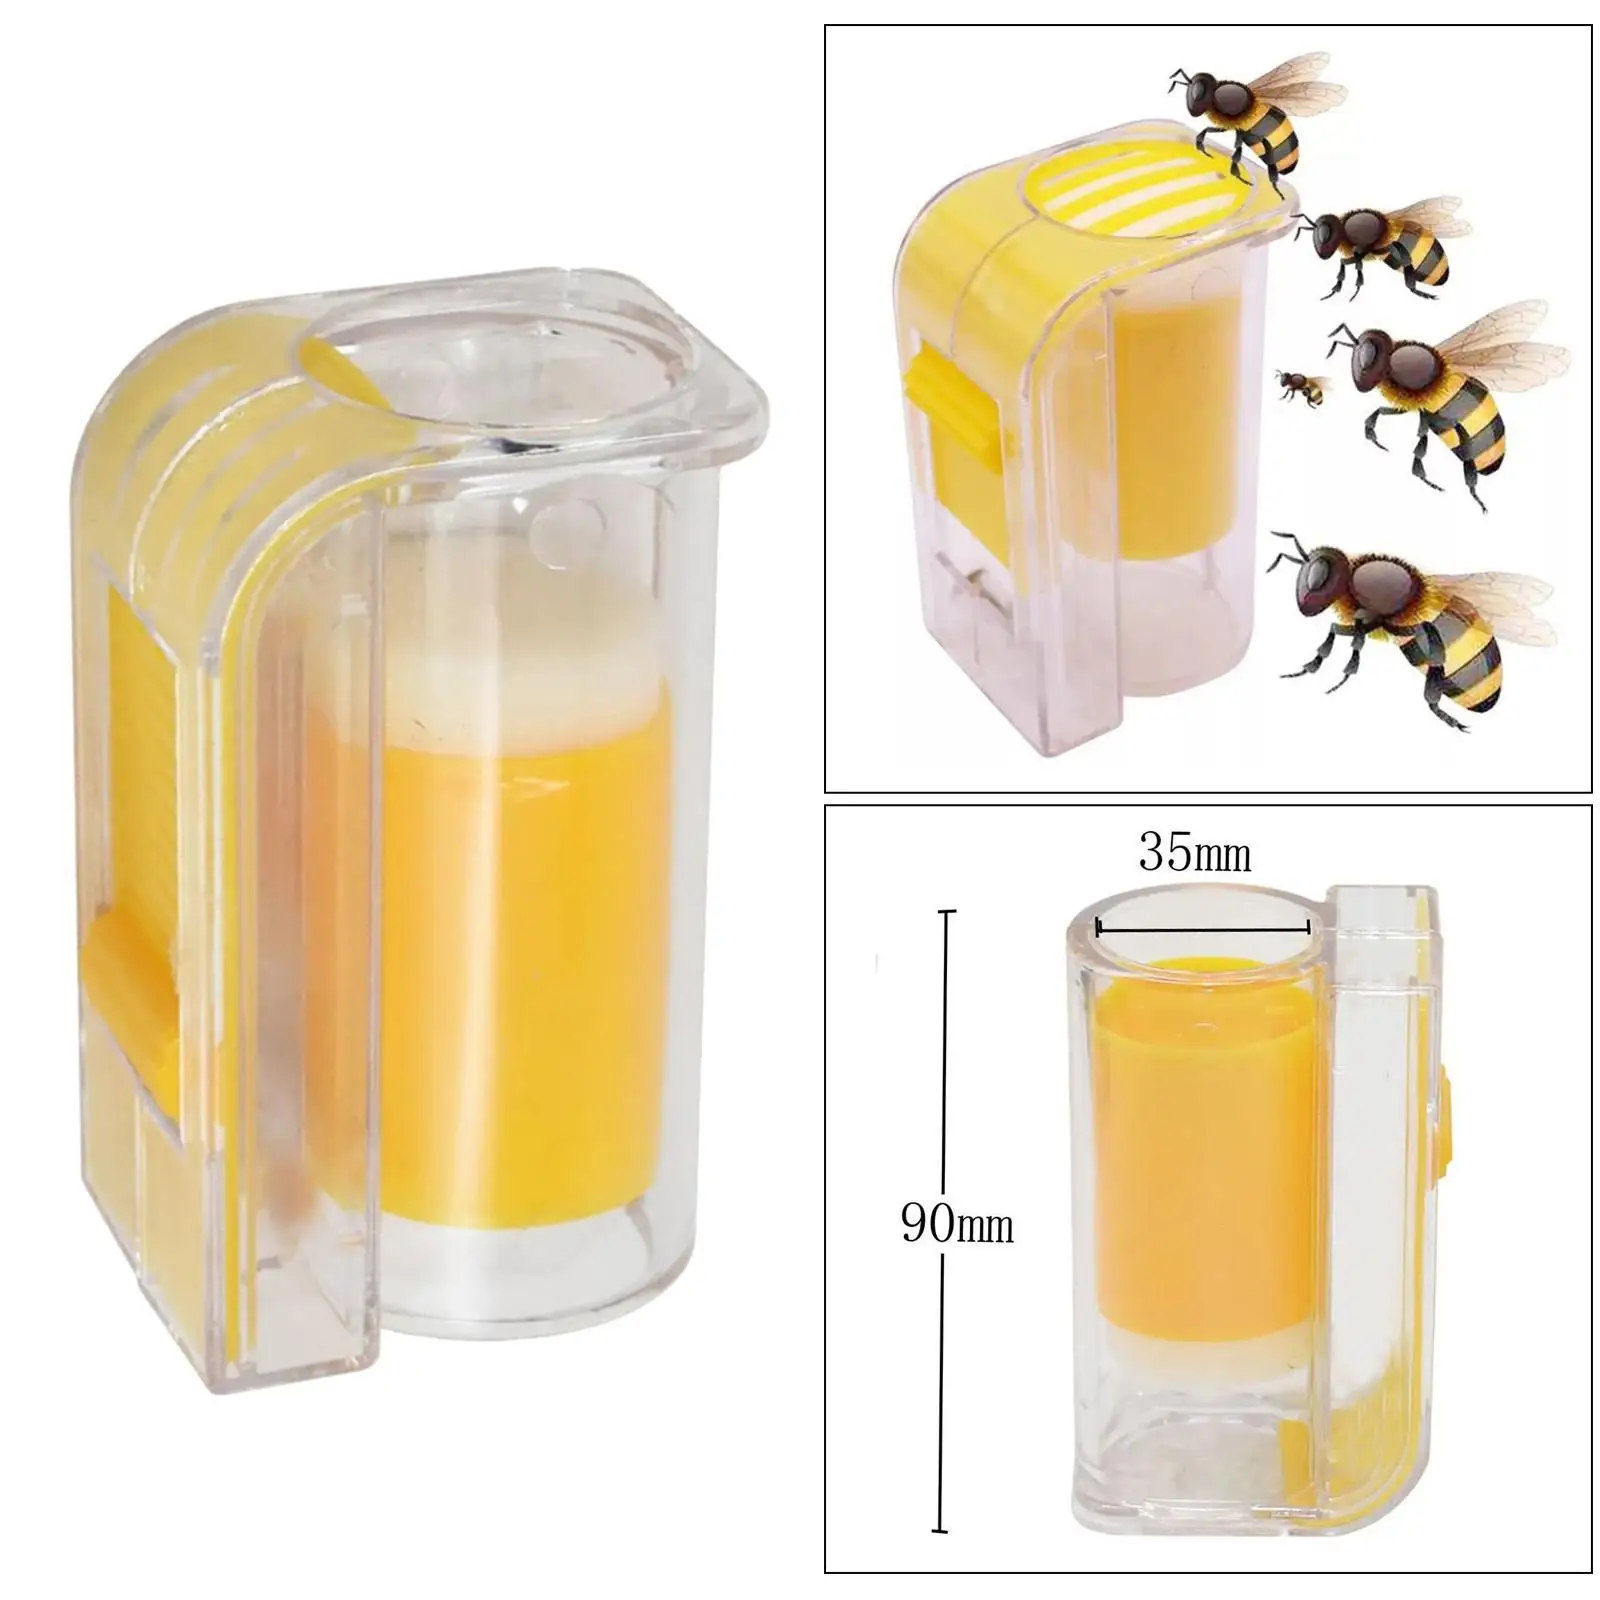 Queen Bee Catcher Cage Marking Bottle One Hand - Beekeeping Tools, Easy to Use